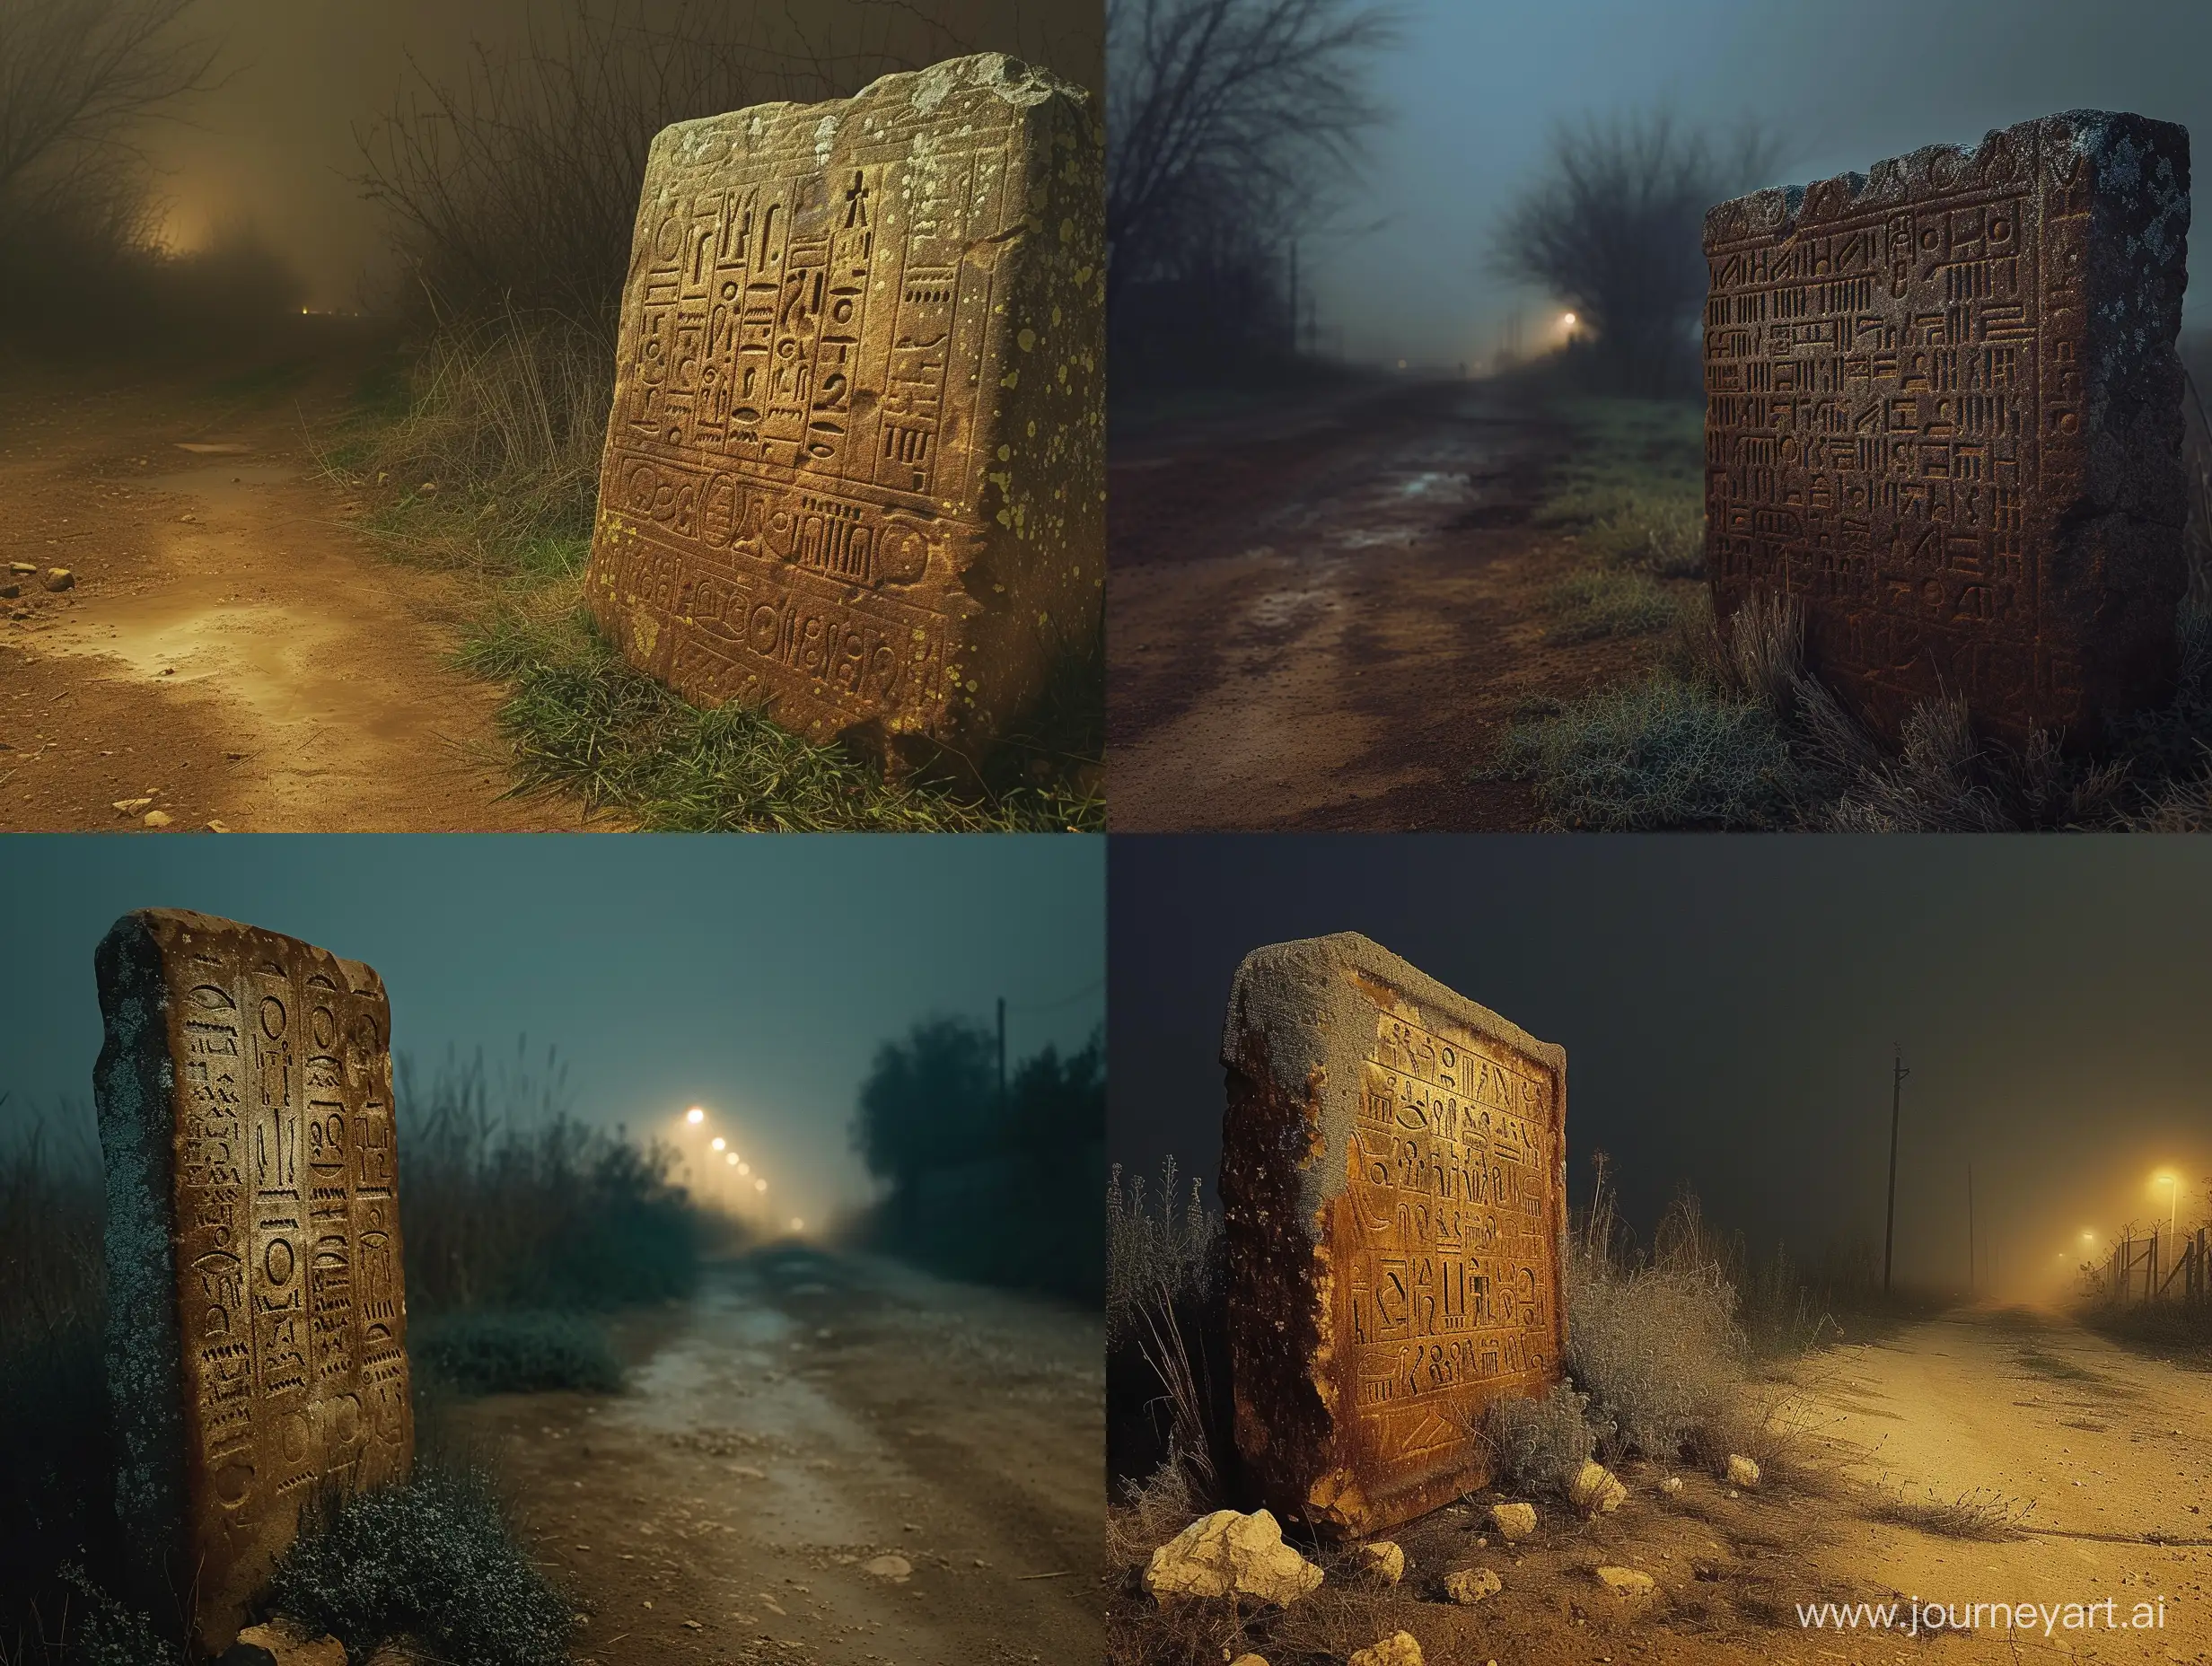 A stone with a cuneiform inscription on it at the next to the dirt road entering the city,rusted,algae,foggy,night,Cuneiform letters,aincient,highly detailed,with intricate carving,night light,historic.